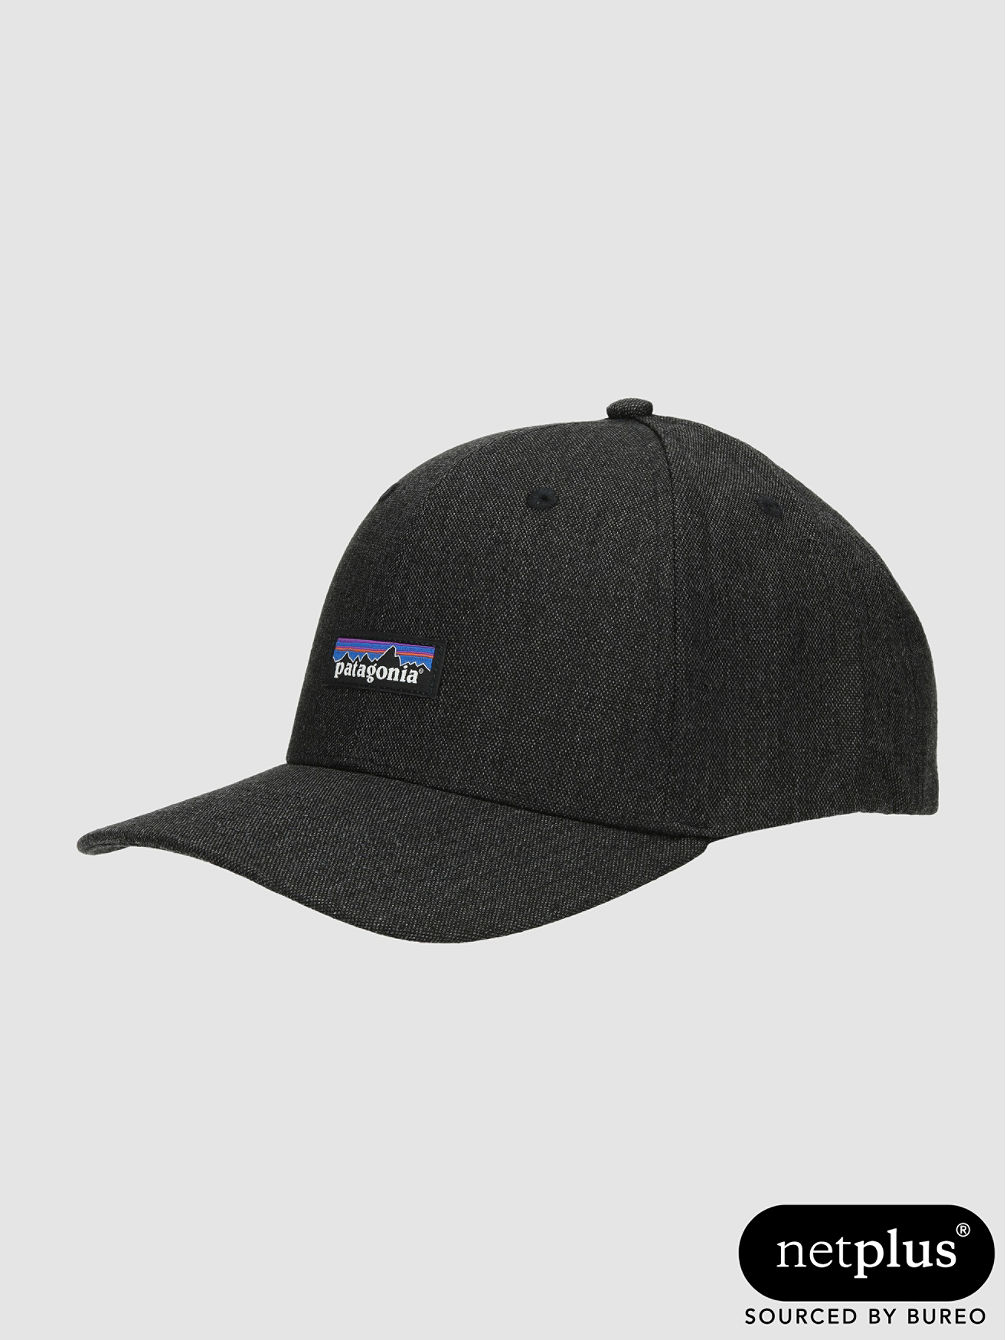 Tin Shed Casquette